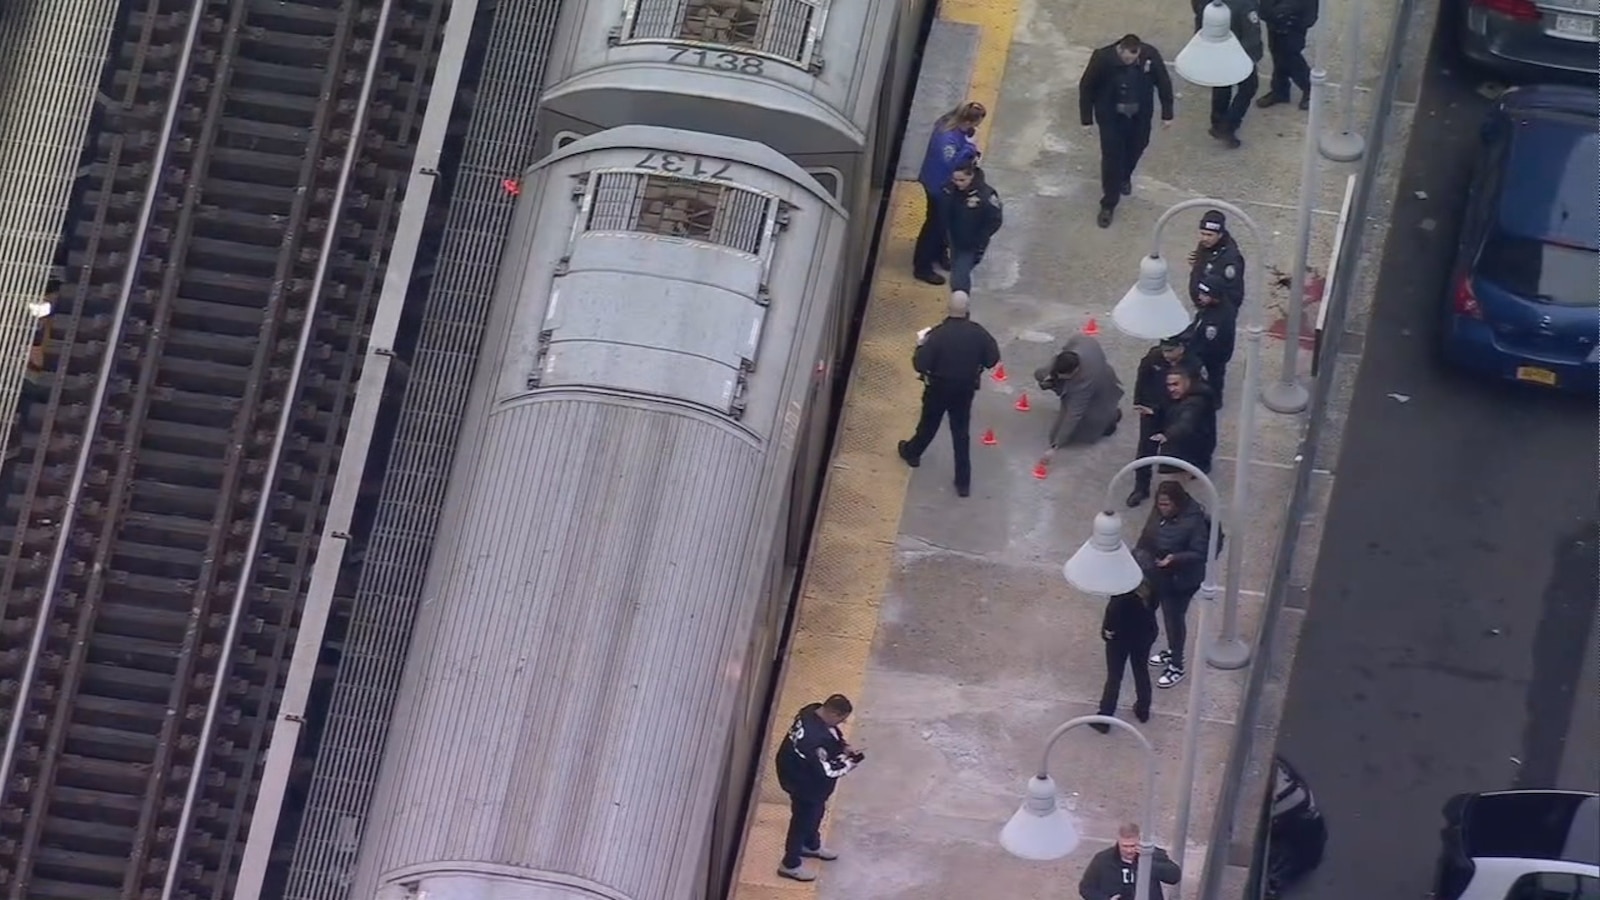 Sources report 1 fatality and 5 injuries in a shooting incident at a New York City subway station